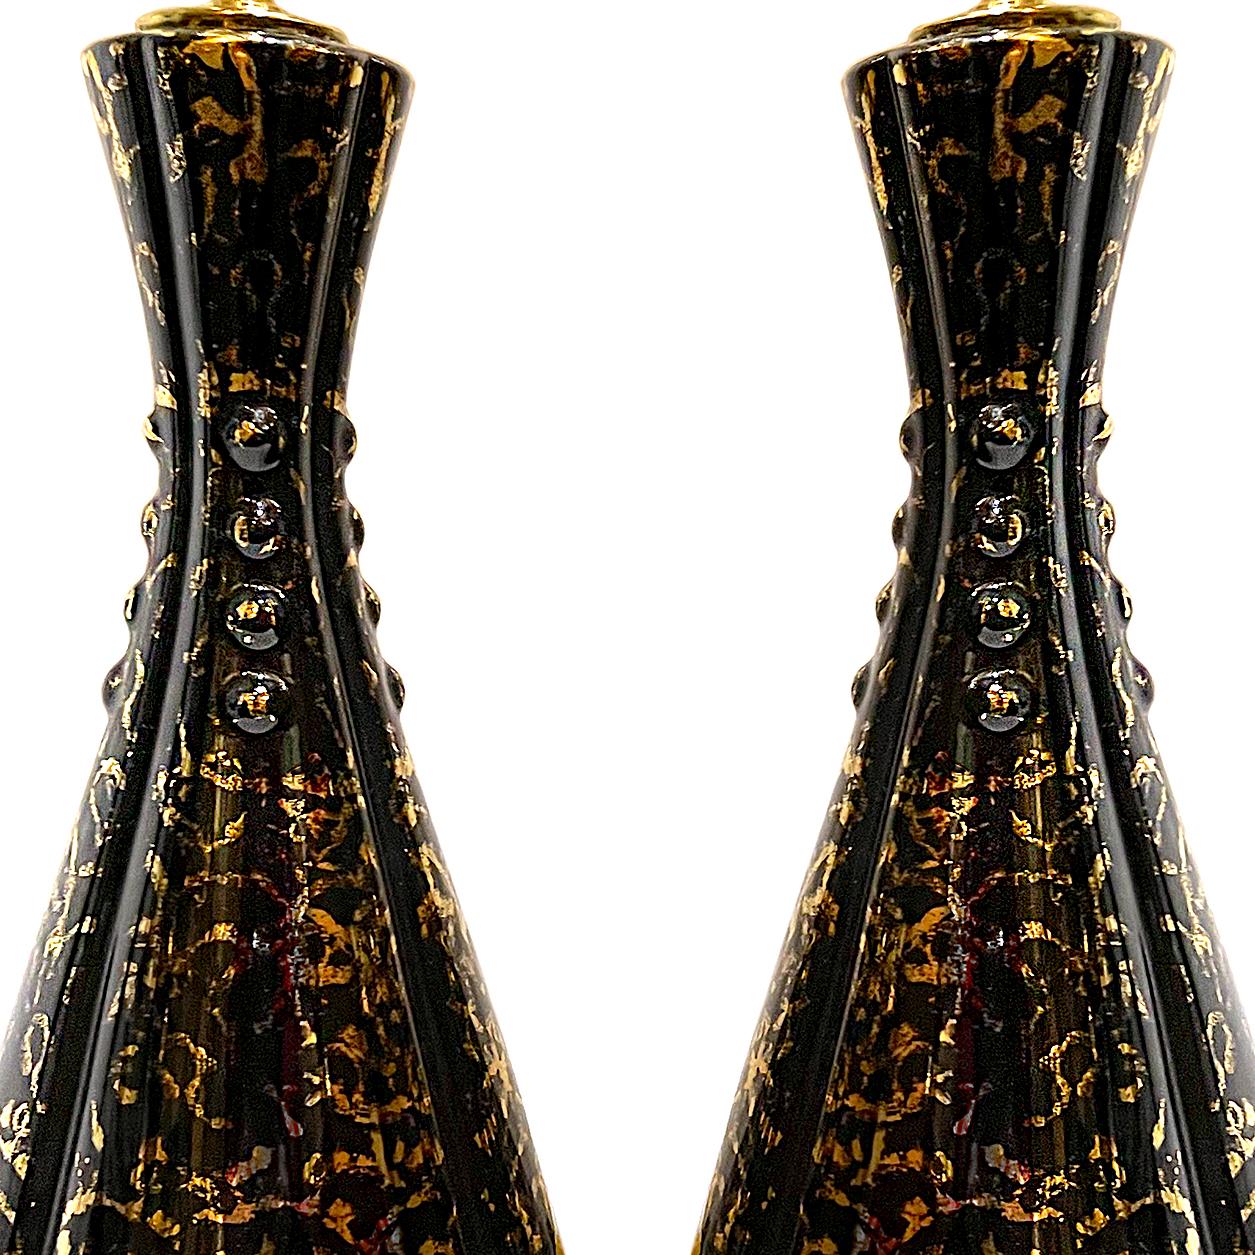 A pair of Italian circa 1950's black porcelain lamps with gold decoration.

Measurements:
Height of body: 15.5